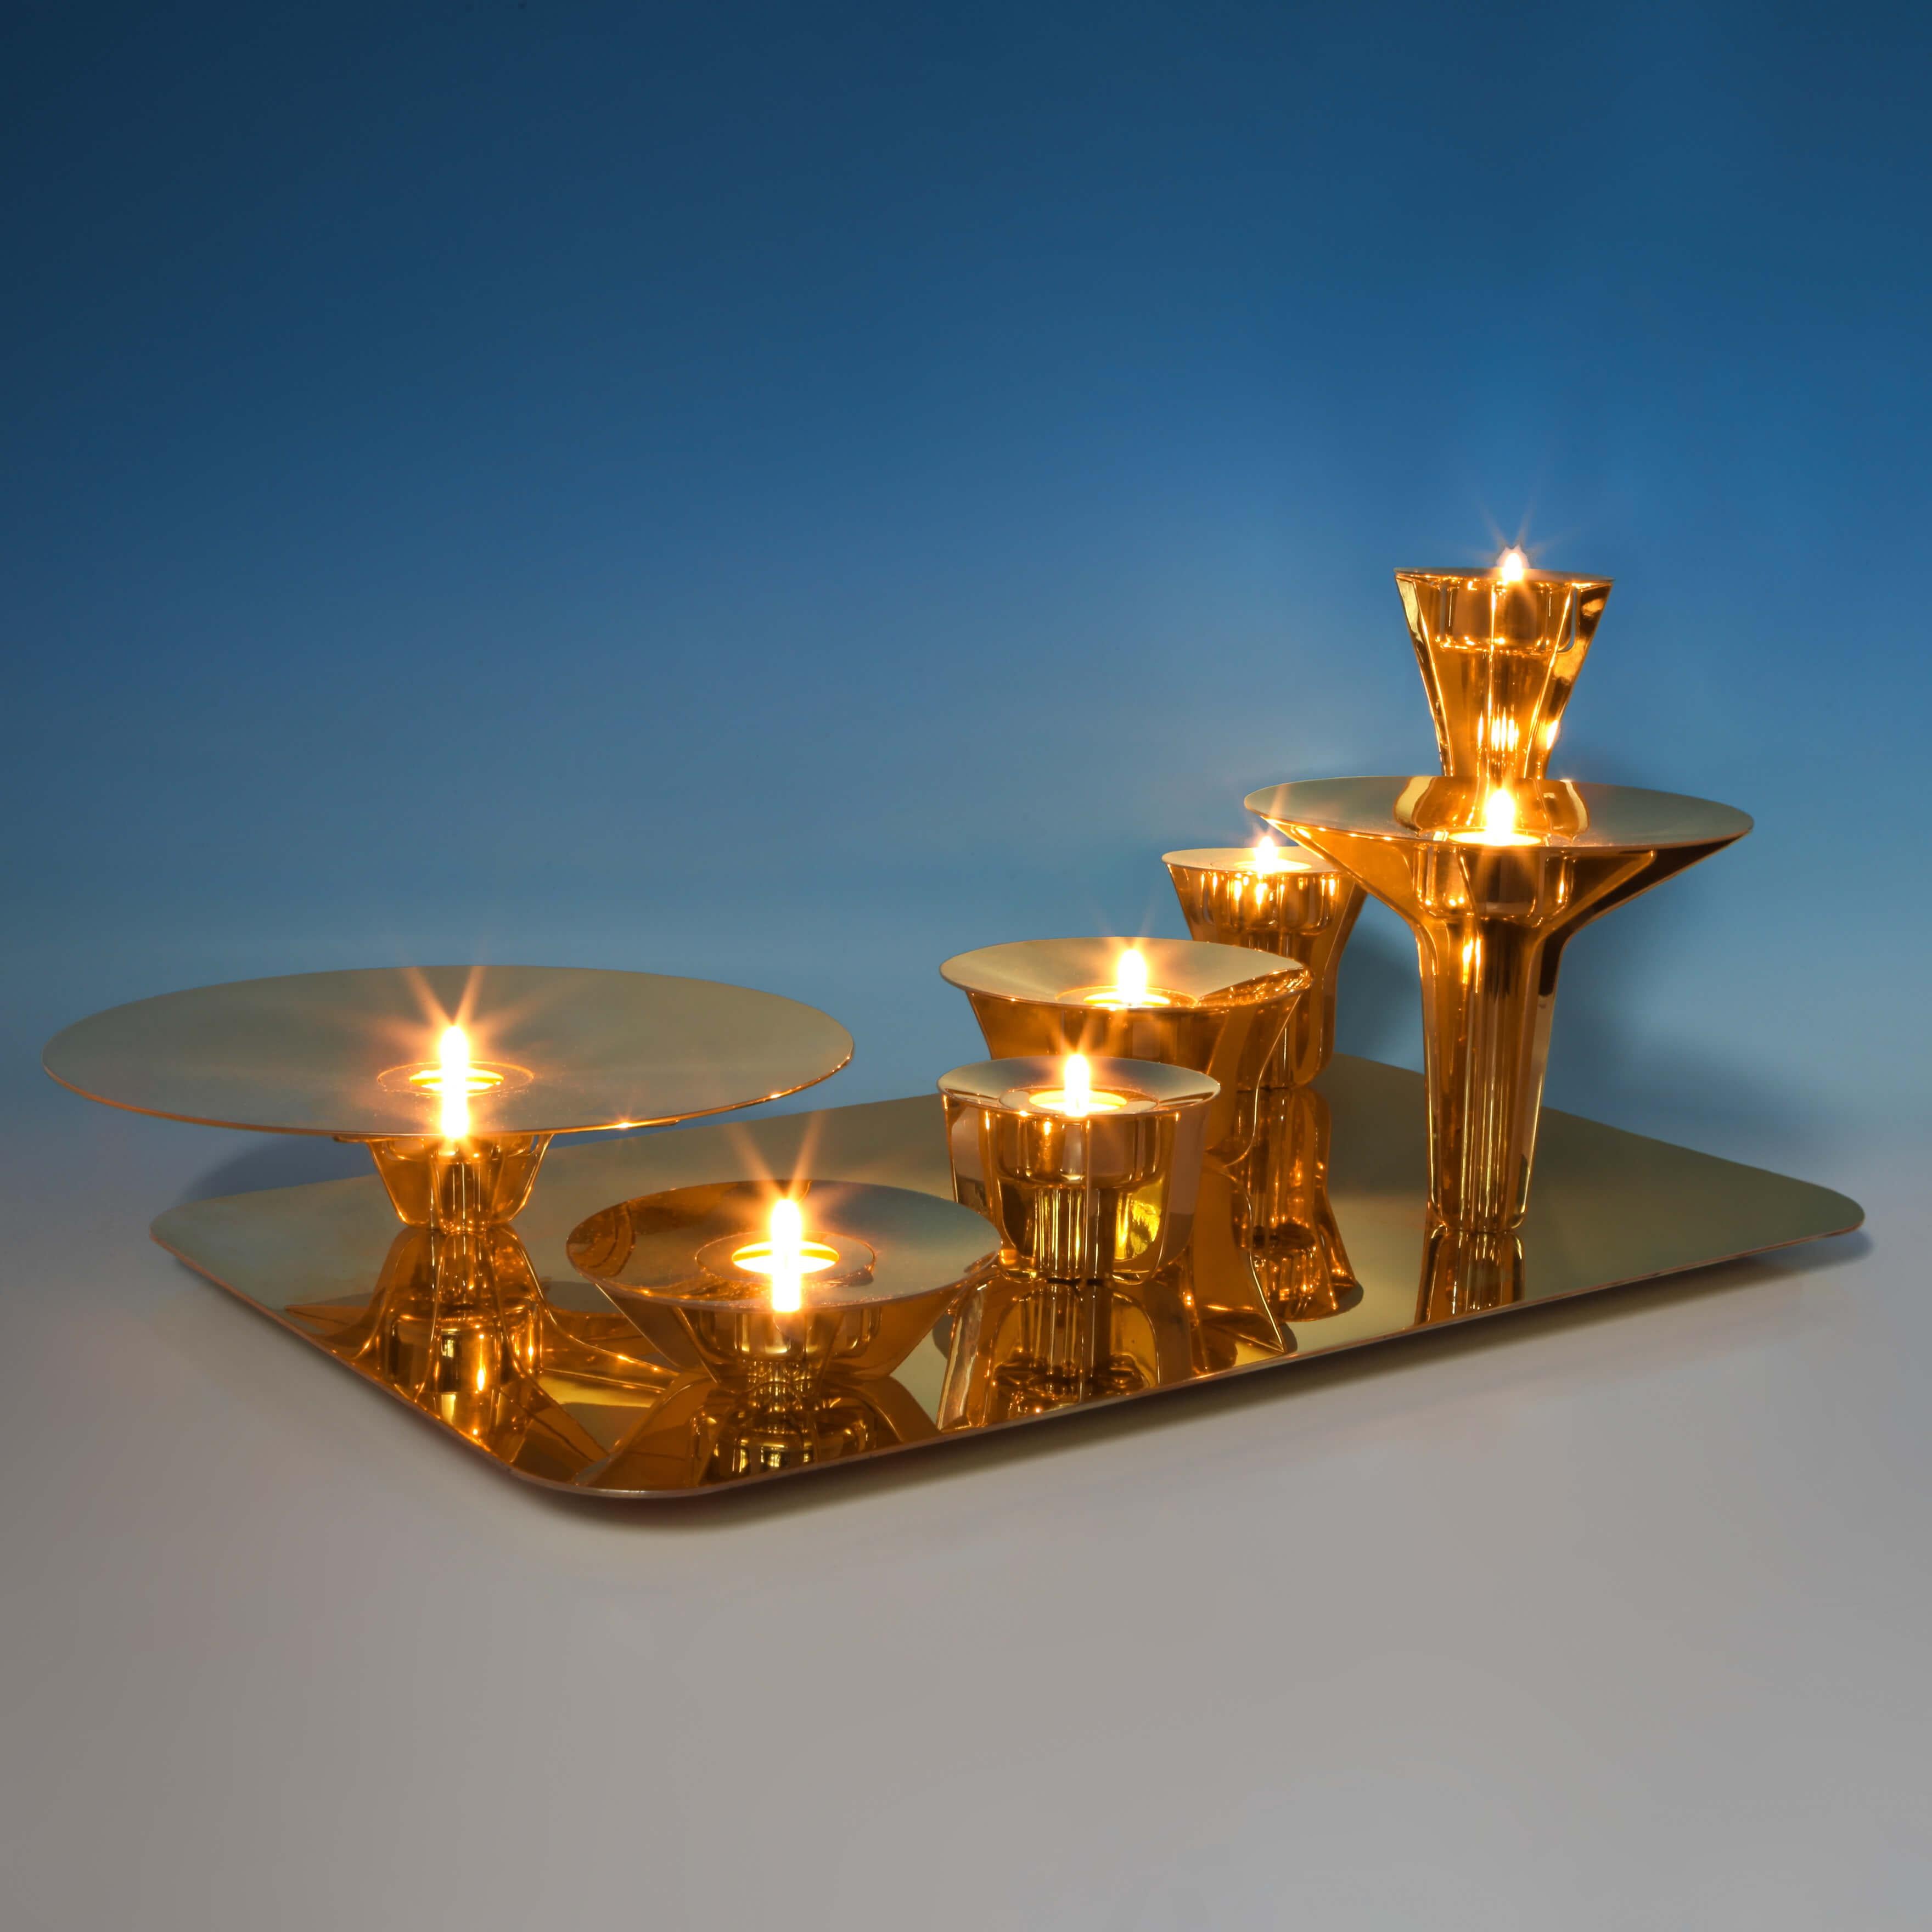 English Modern Silver Gilt Surtout De Table Designed by Barber & Osgerby for Mallett For Sale